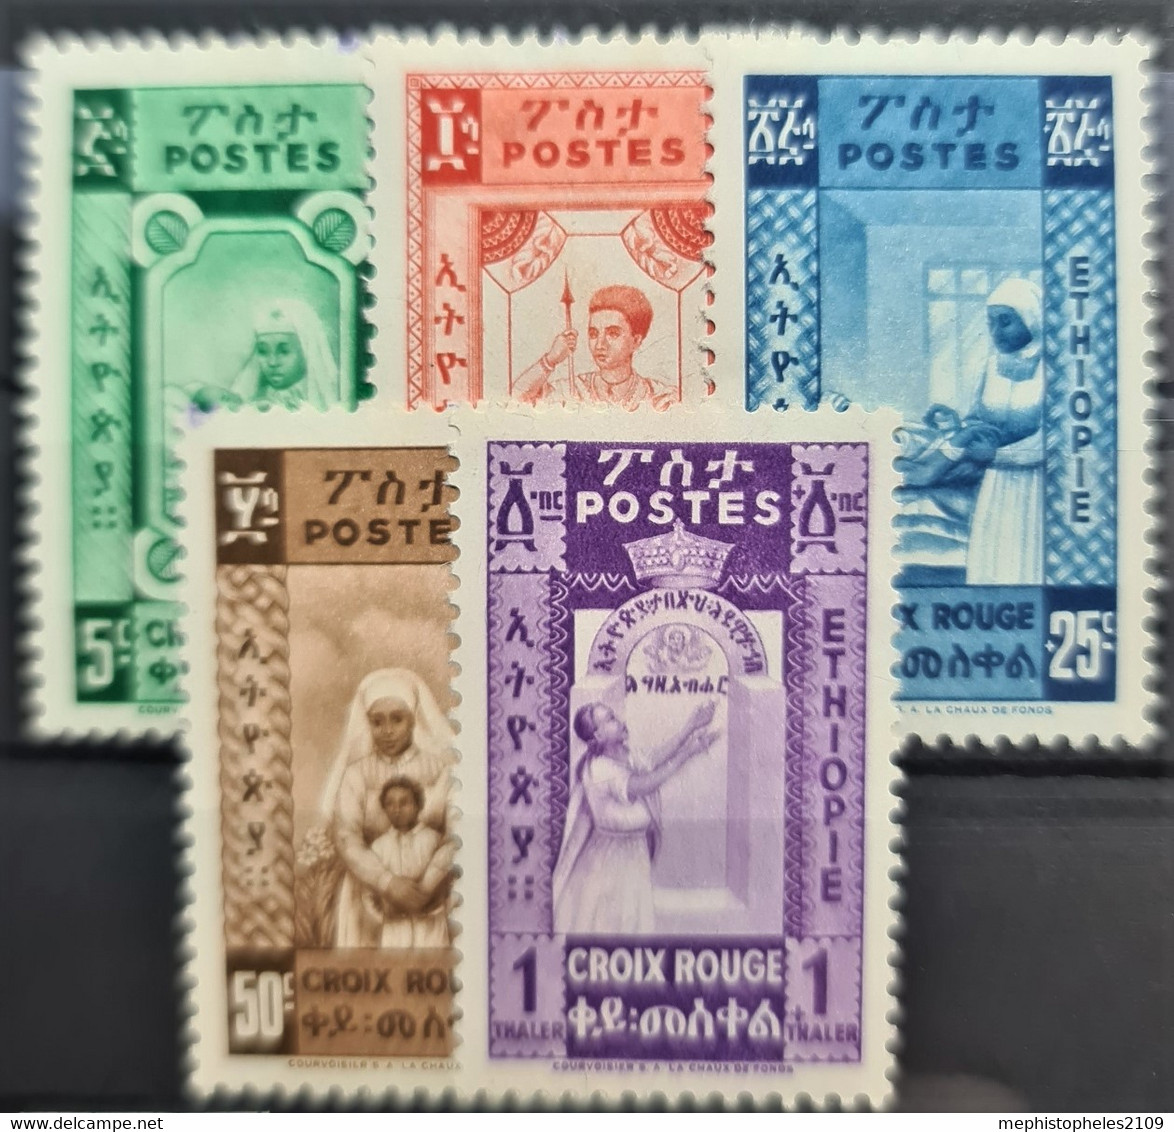 ETHIOPIA 1936 - MLH - Red Cross Not Issued - Complete Set! - Ethiopie